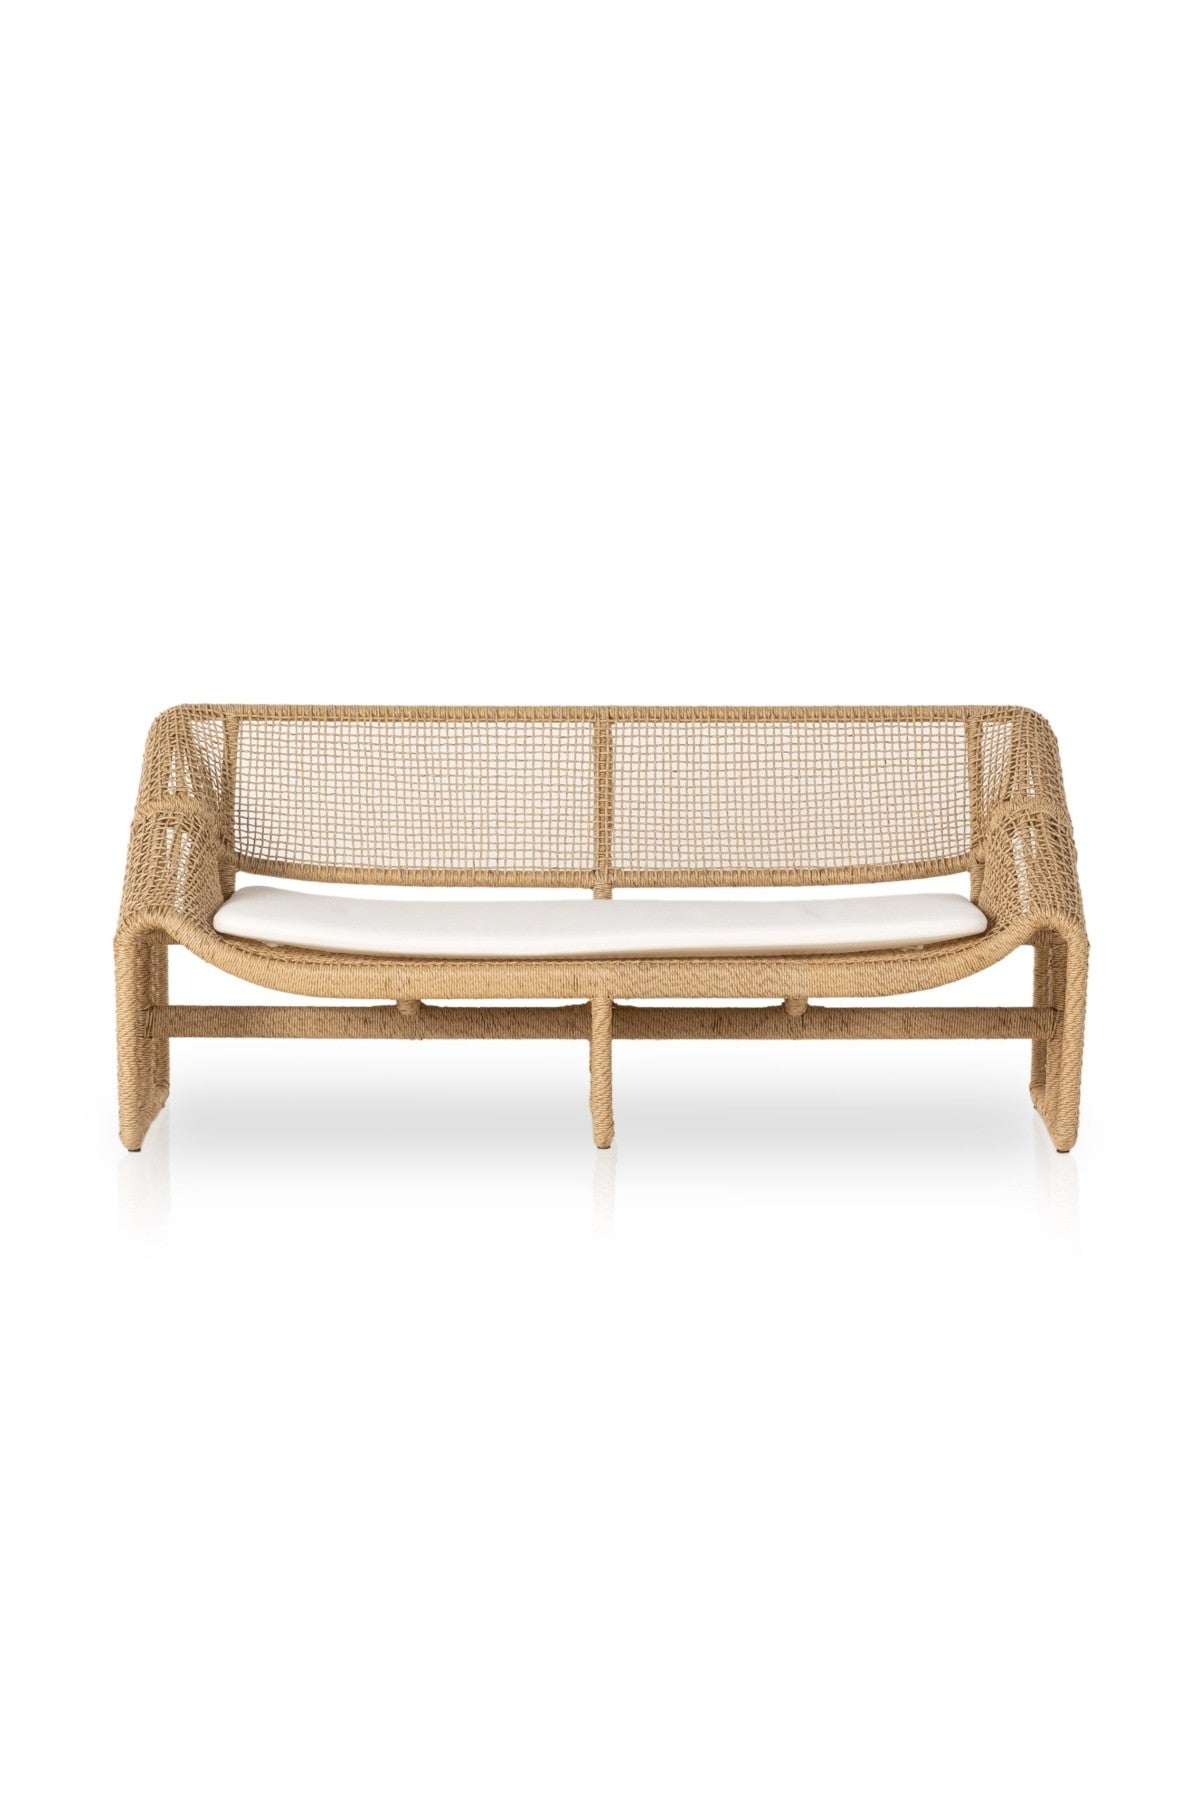 Selvie Outdoor Sofa - 2 Colors